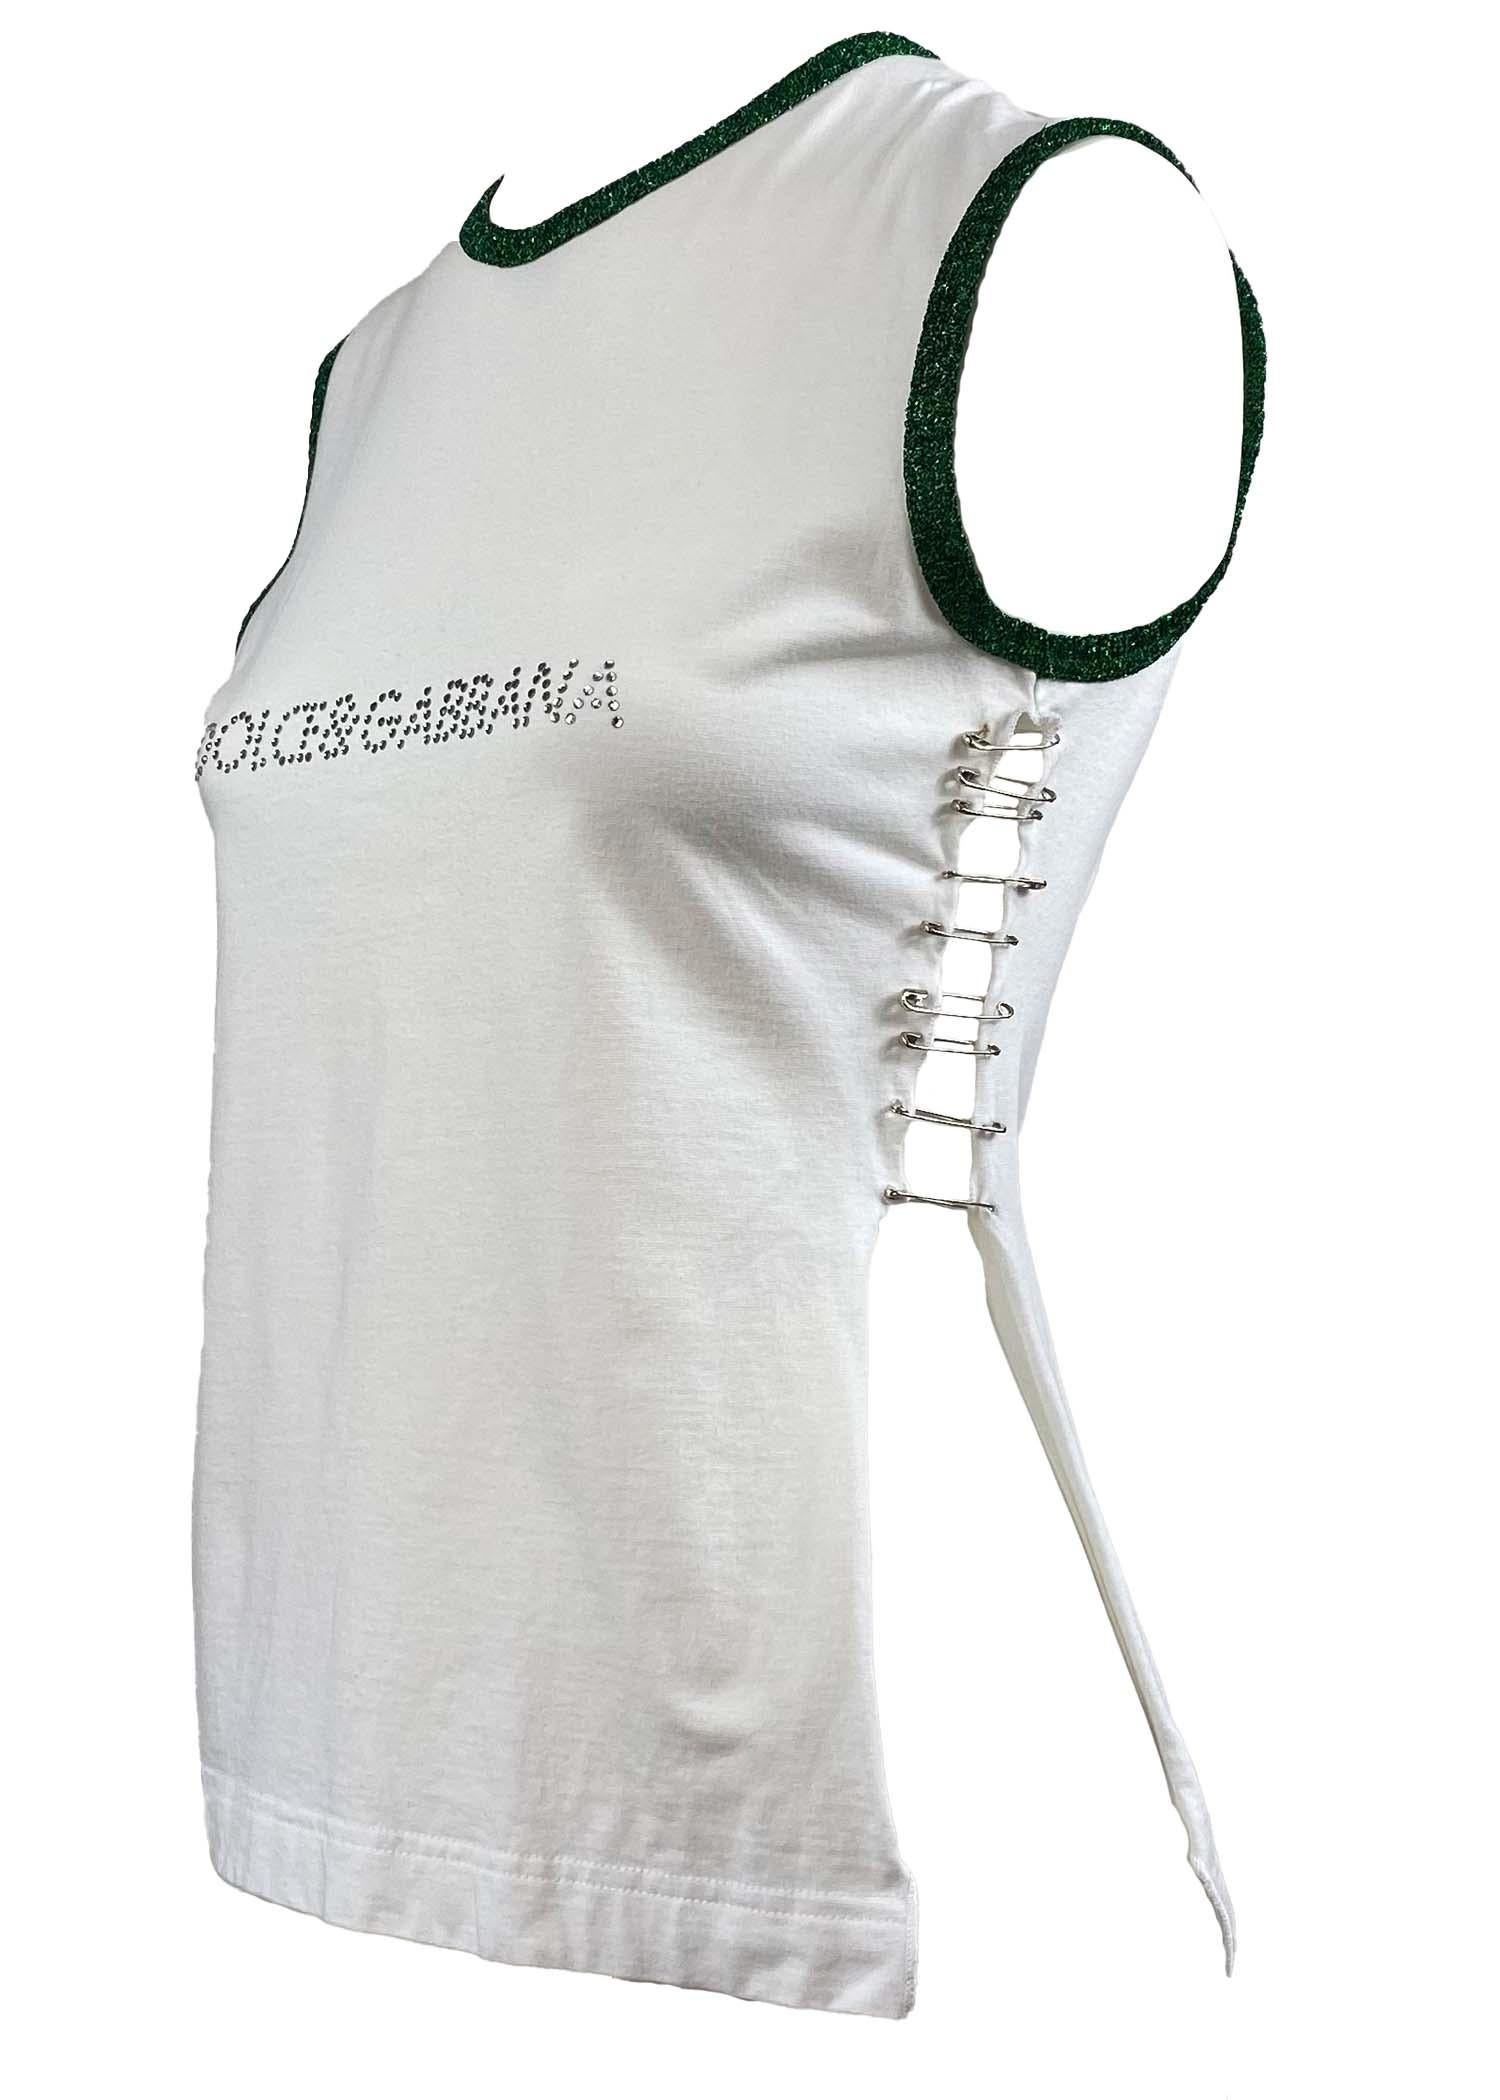 TheRealList presents: a barely-there tank top held together by safety pins hand-placed by Dolce & Gabbana. The green trim around the neck and arms has some lurex sparkle that ties in with the rhinestone logo and shiny metal pins. Part of the S/S